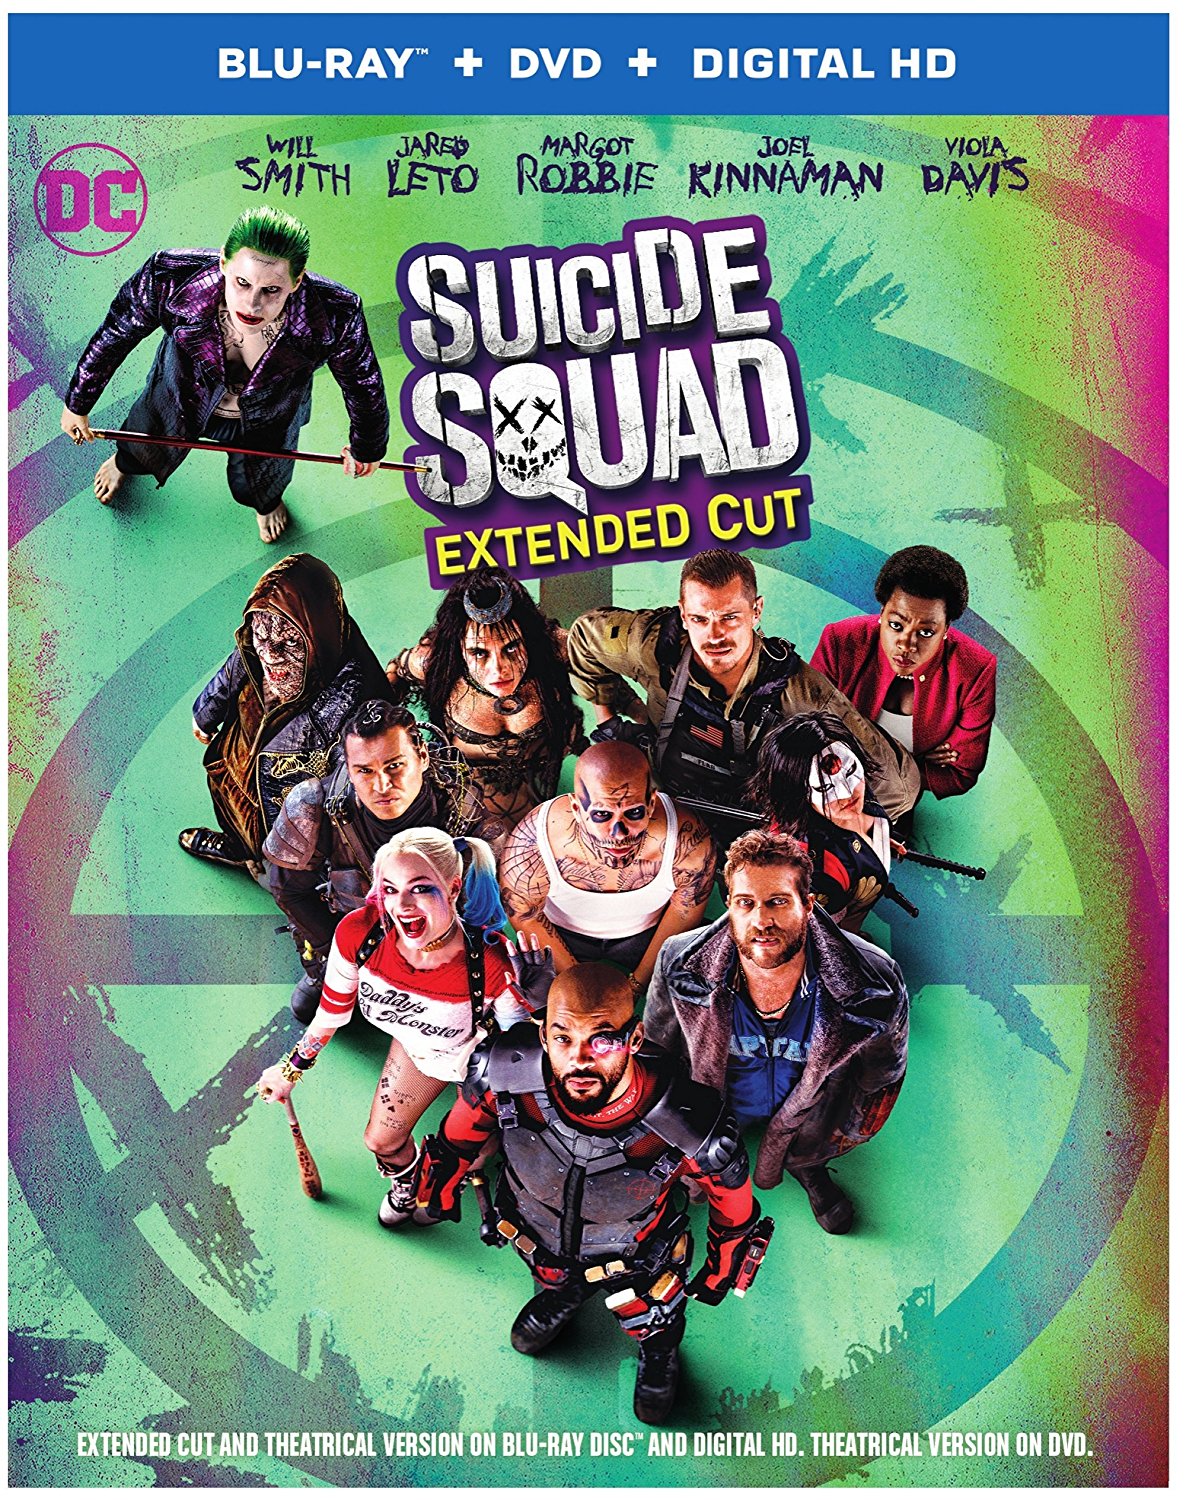 Blu-ray + DVD + Digital HD Movies: Suicide Squad, Snowden, Blair Witch  $10 Each & More + Free Store Pickup